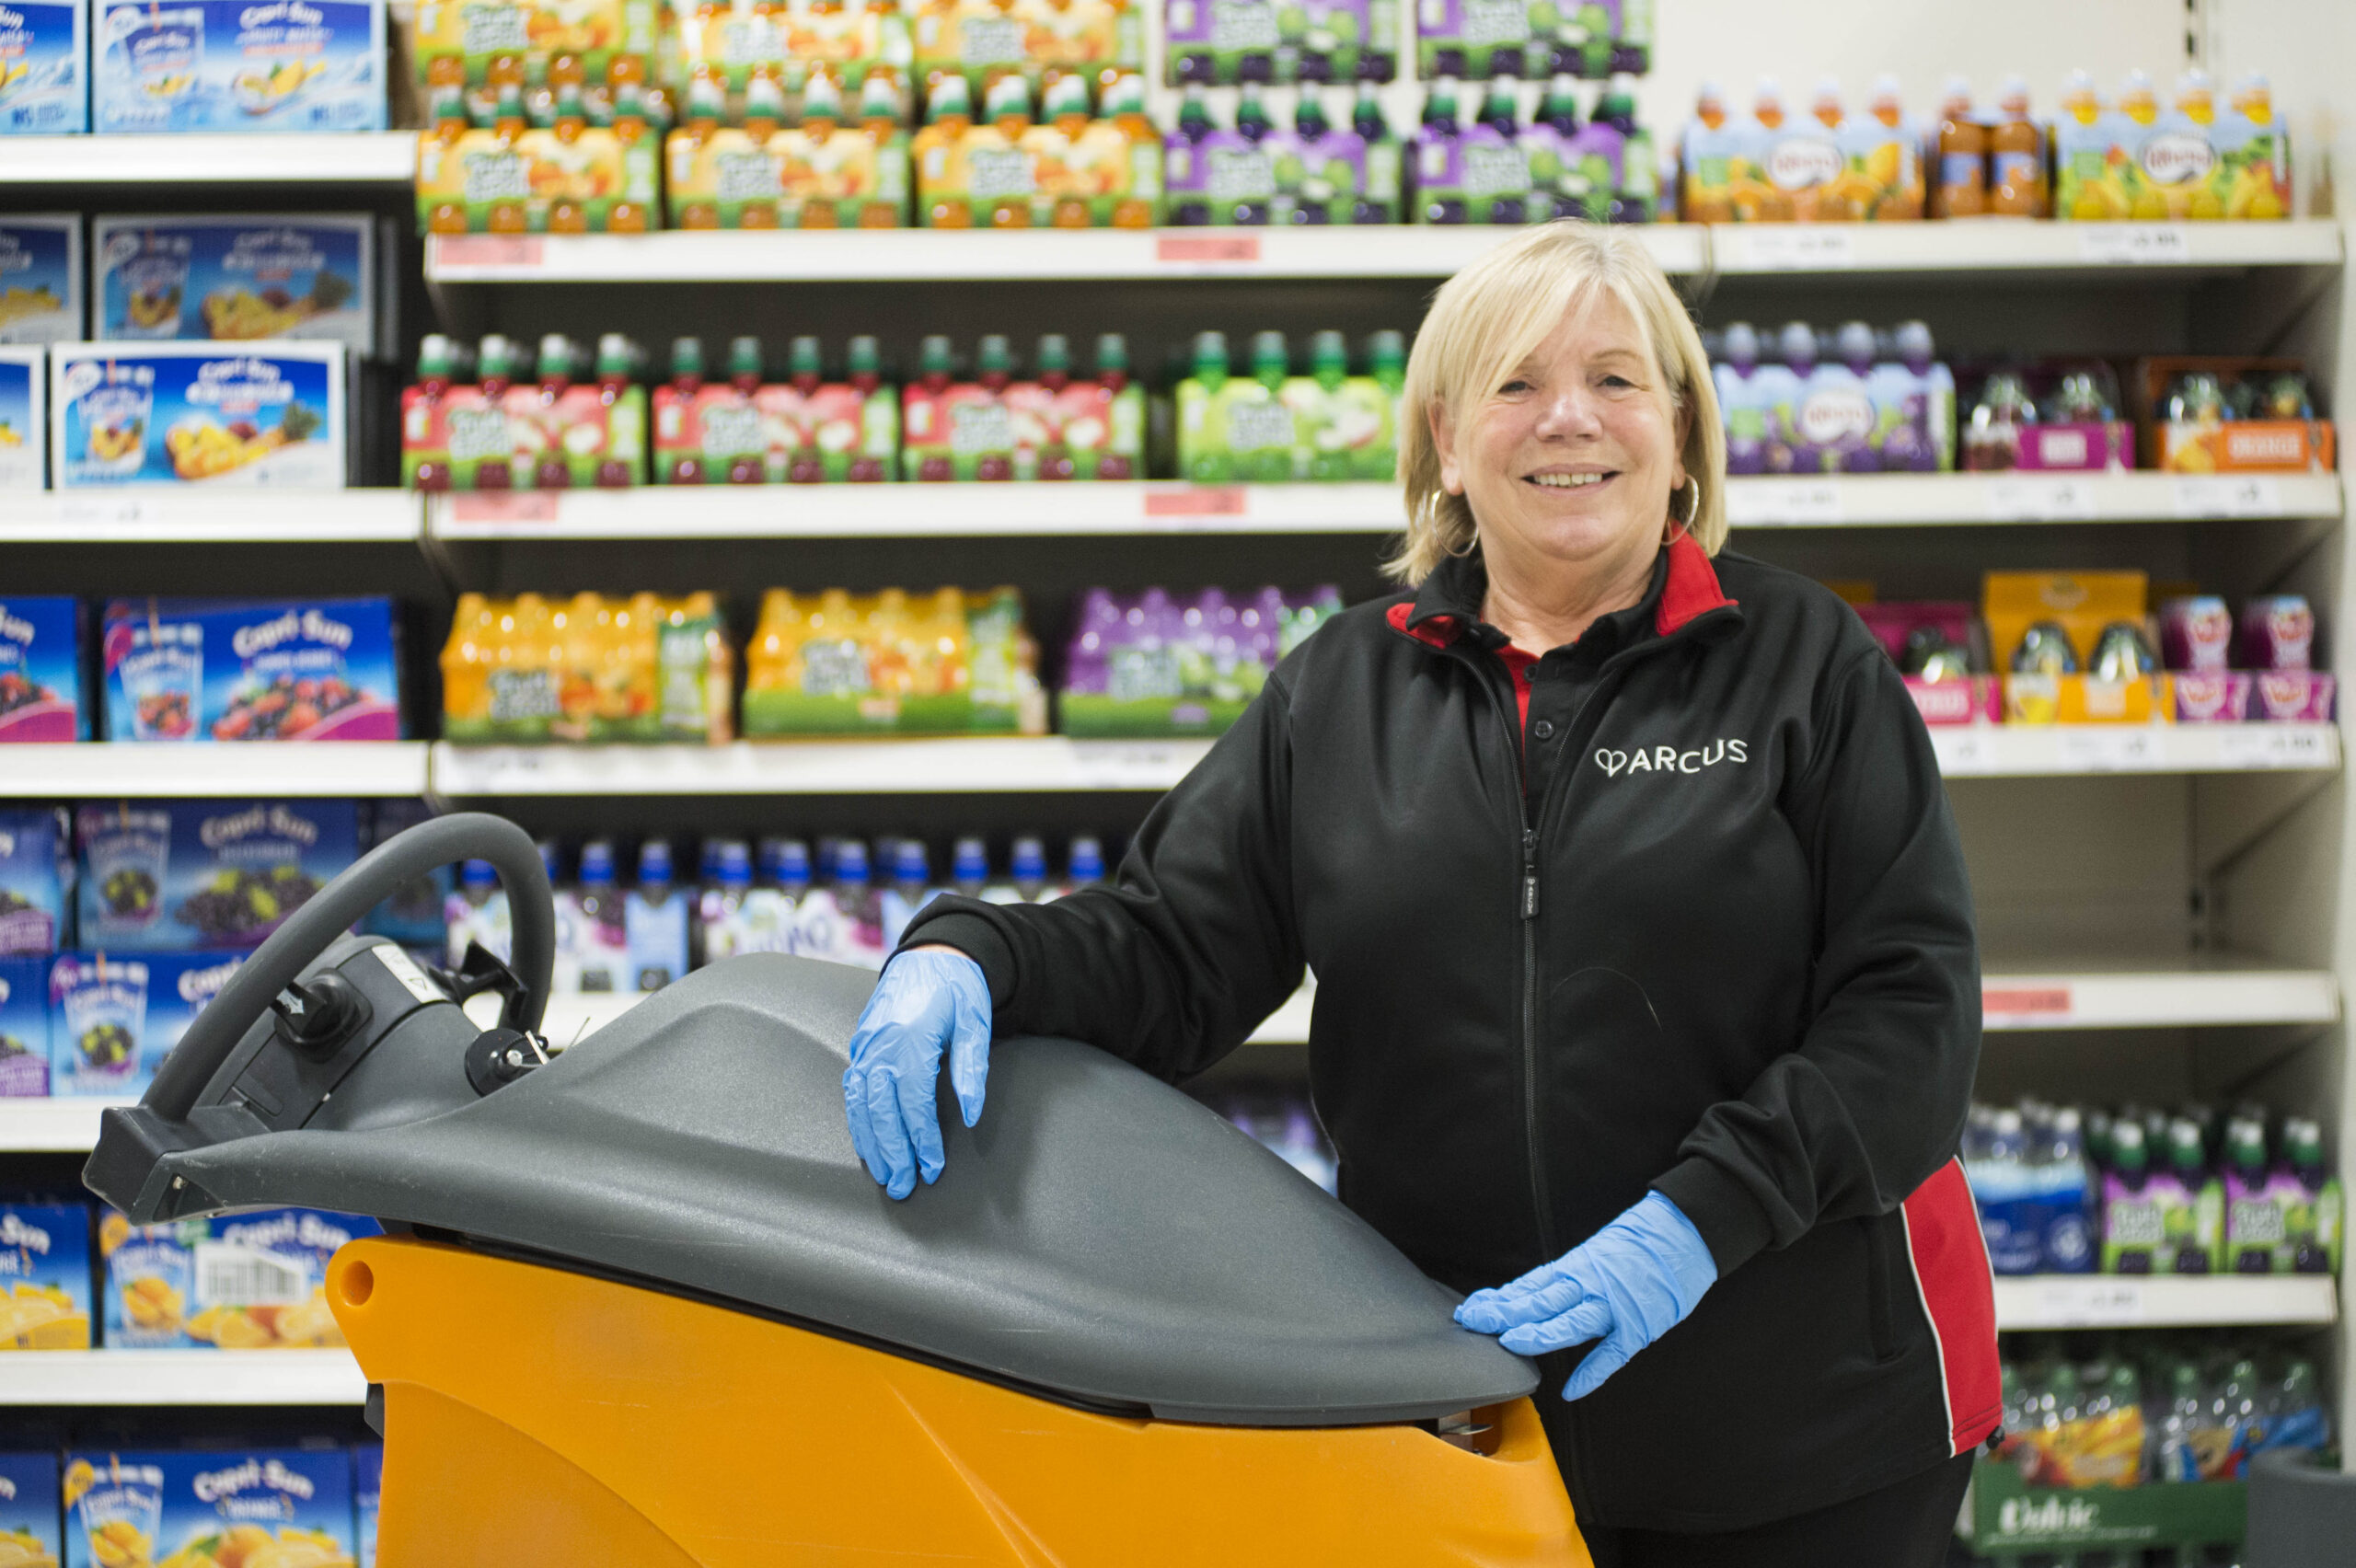 Arcus is awarded an additional cleaning contract with Sainsbury’s